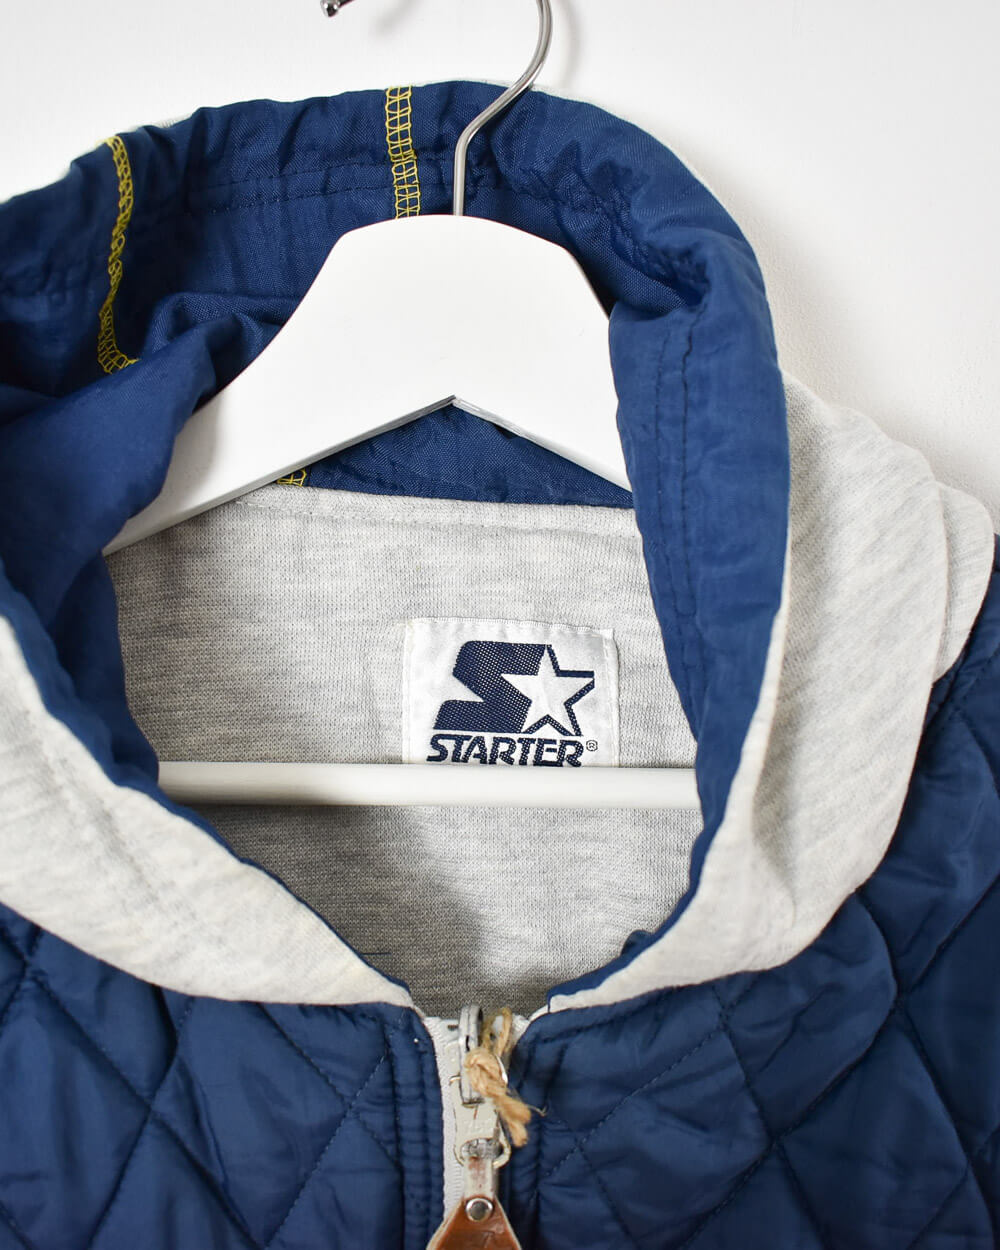 Starter Notre Dame Hooded Winter Coat - Medium - Domno Vintage 90s, 80s, 00s Retro and Vintage Clothing 